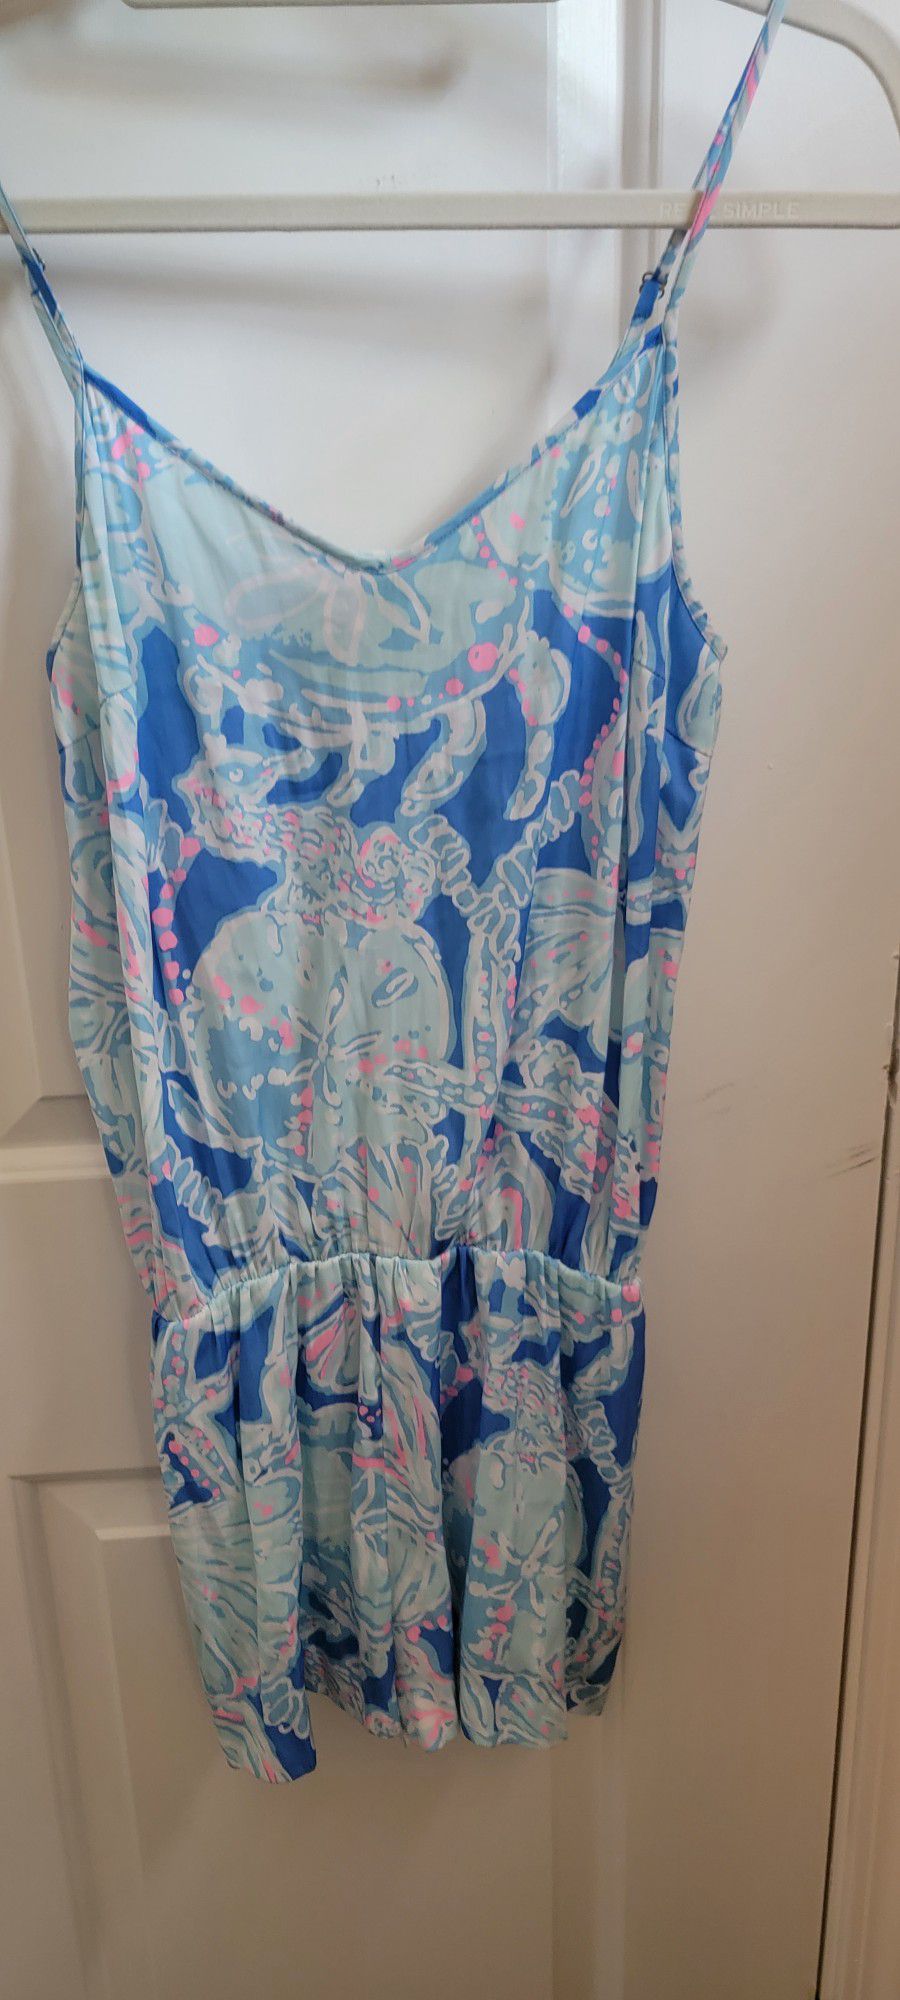 Lilly Pulitzer Romper - Size XS